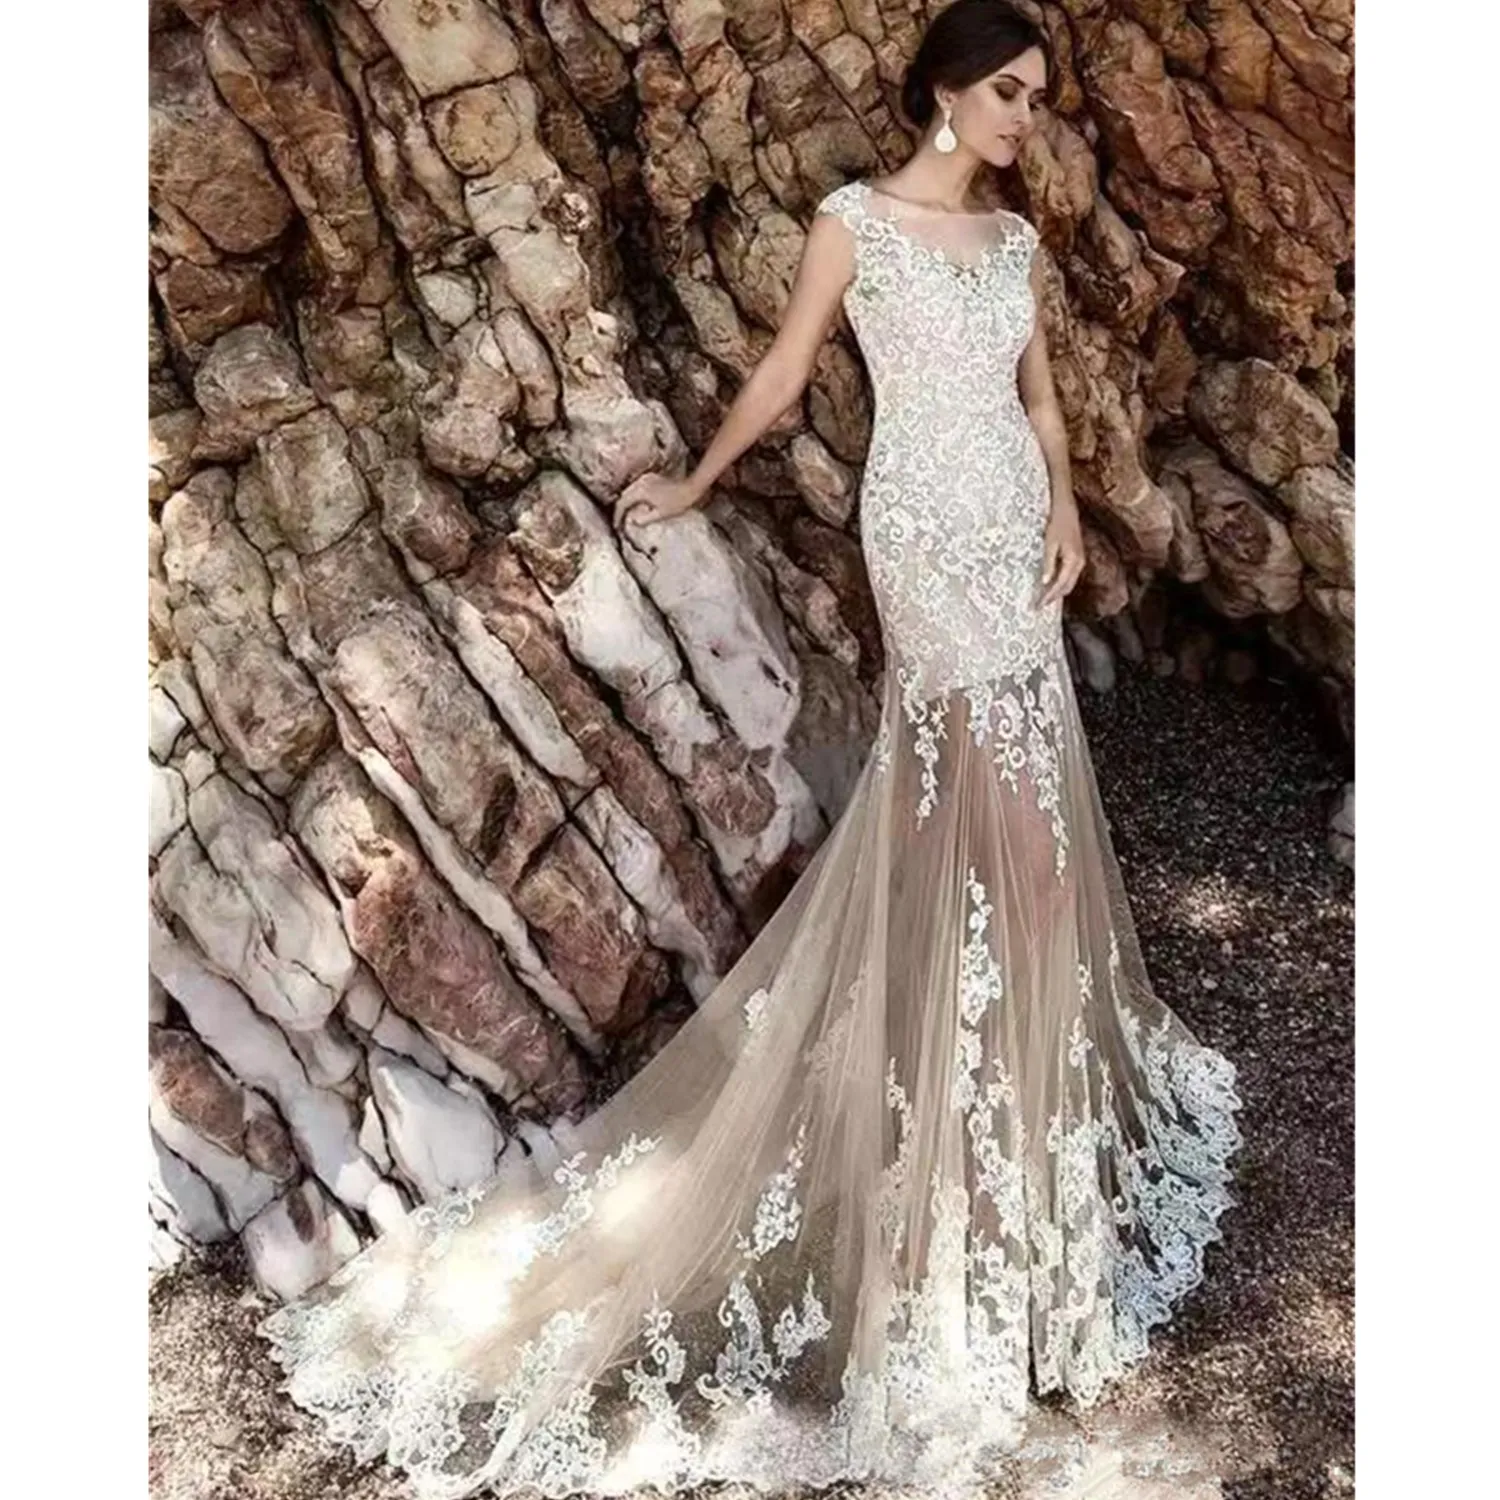 Modern Lace Mermaid Wedding Dresses With Detachable Skirt Sexy Sheer Cap Sleeve Scoop Neck Appliqued Long Summer Boho Bridal Gowns